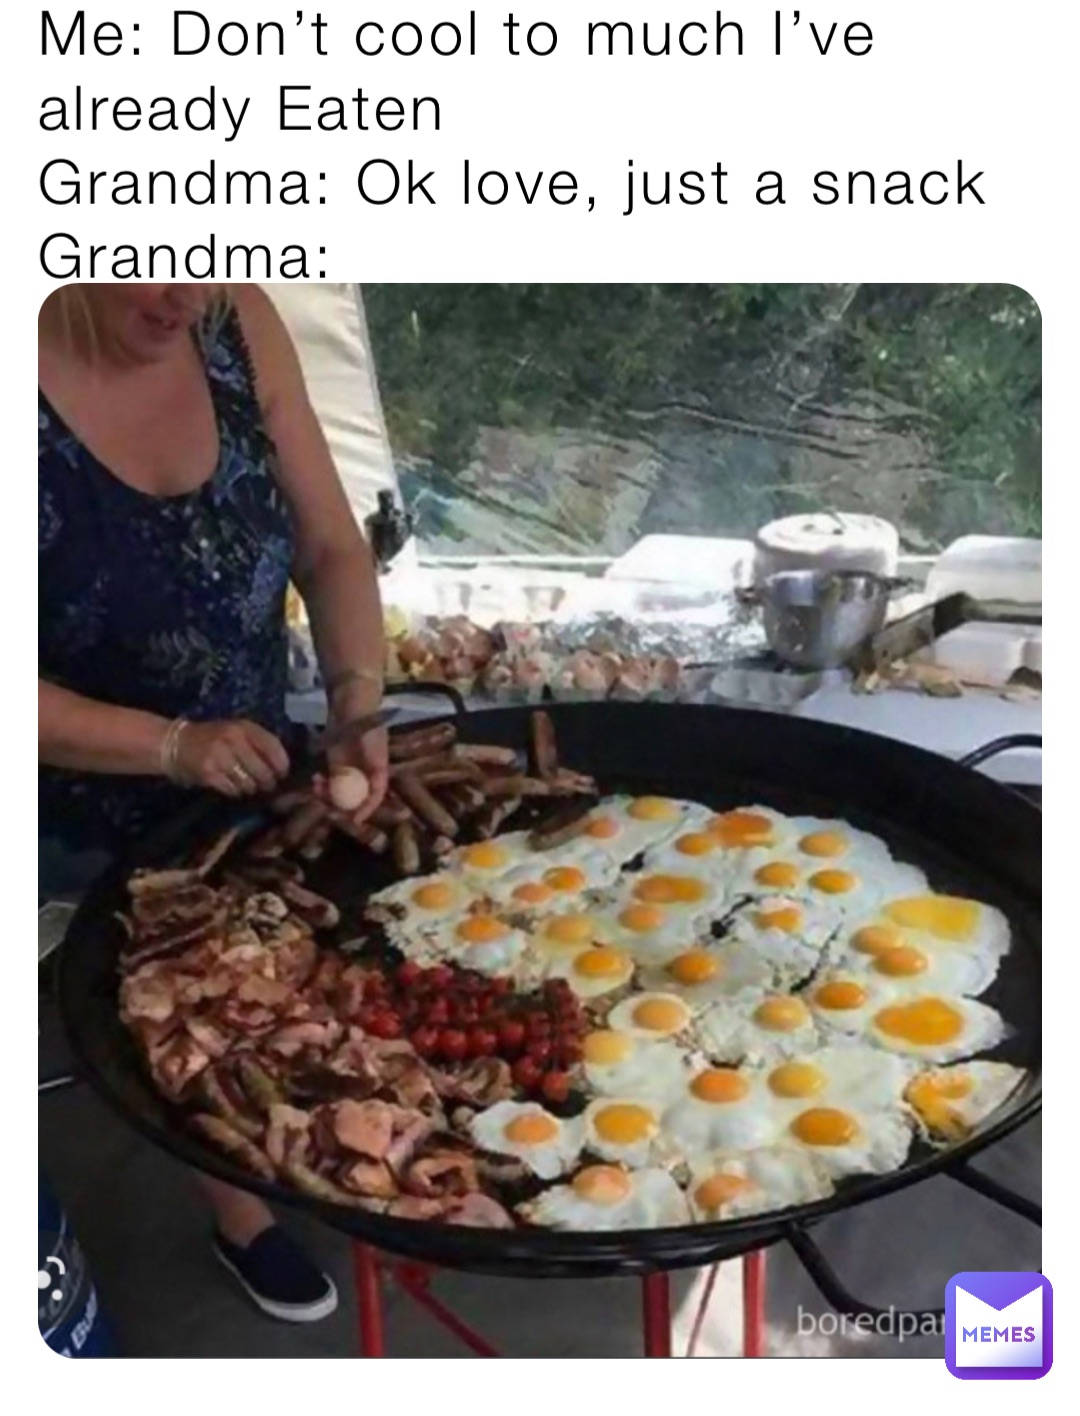 Me: Don’t cool to much I’ve already Eaten
Grandma: Ok love, just a snack
Grandma: